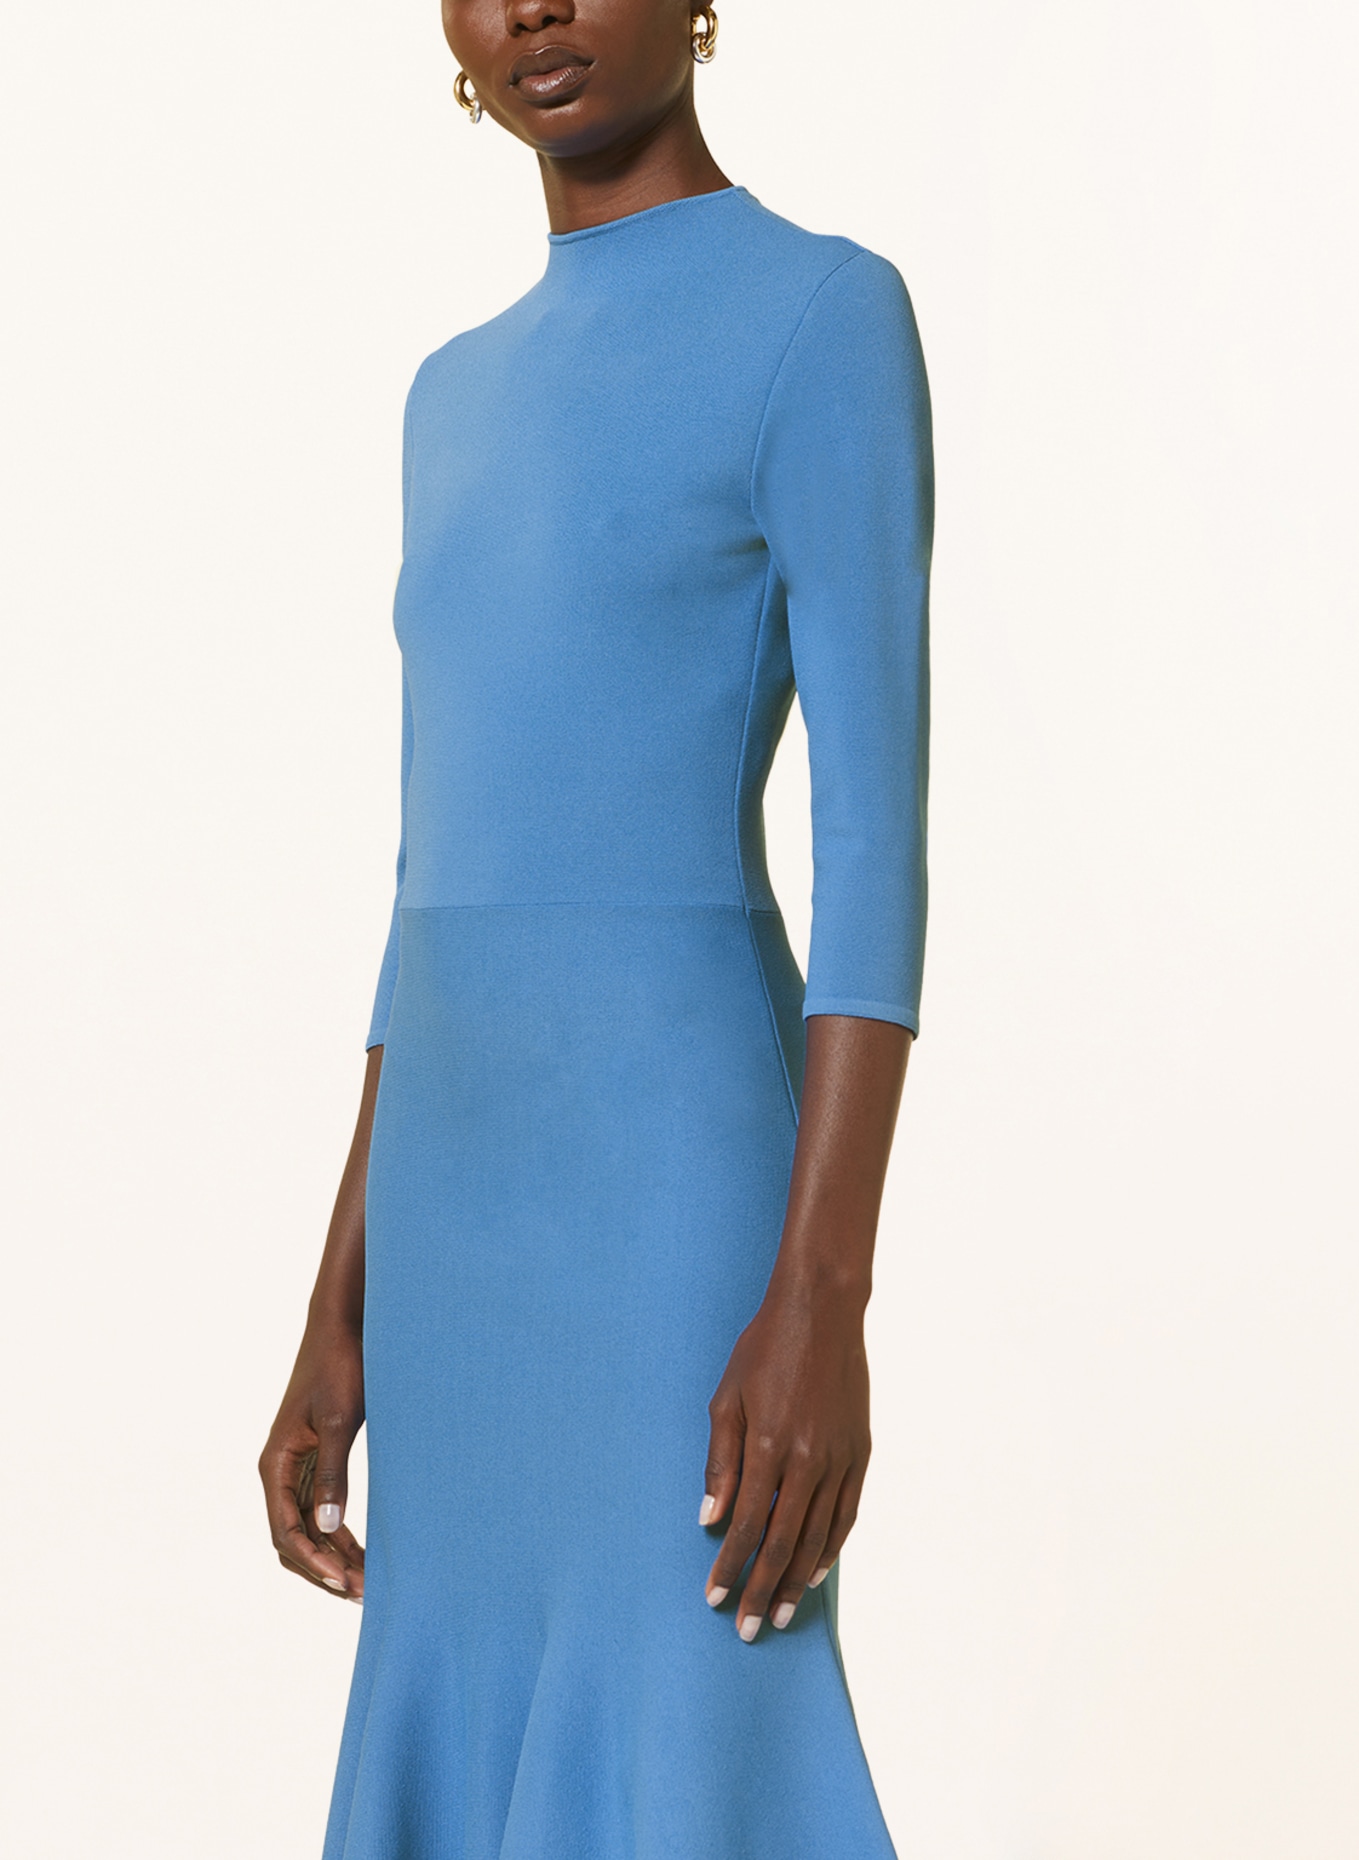 STELLA McCARTNEY Knit dress with 3/4 sleeve, Color: BLUE (Image 4)